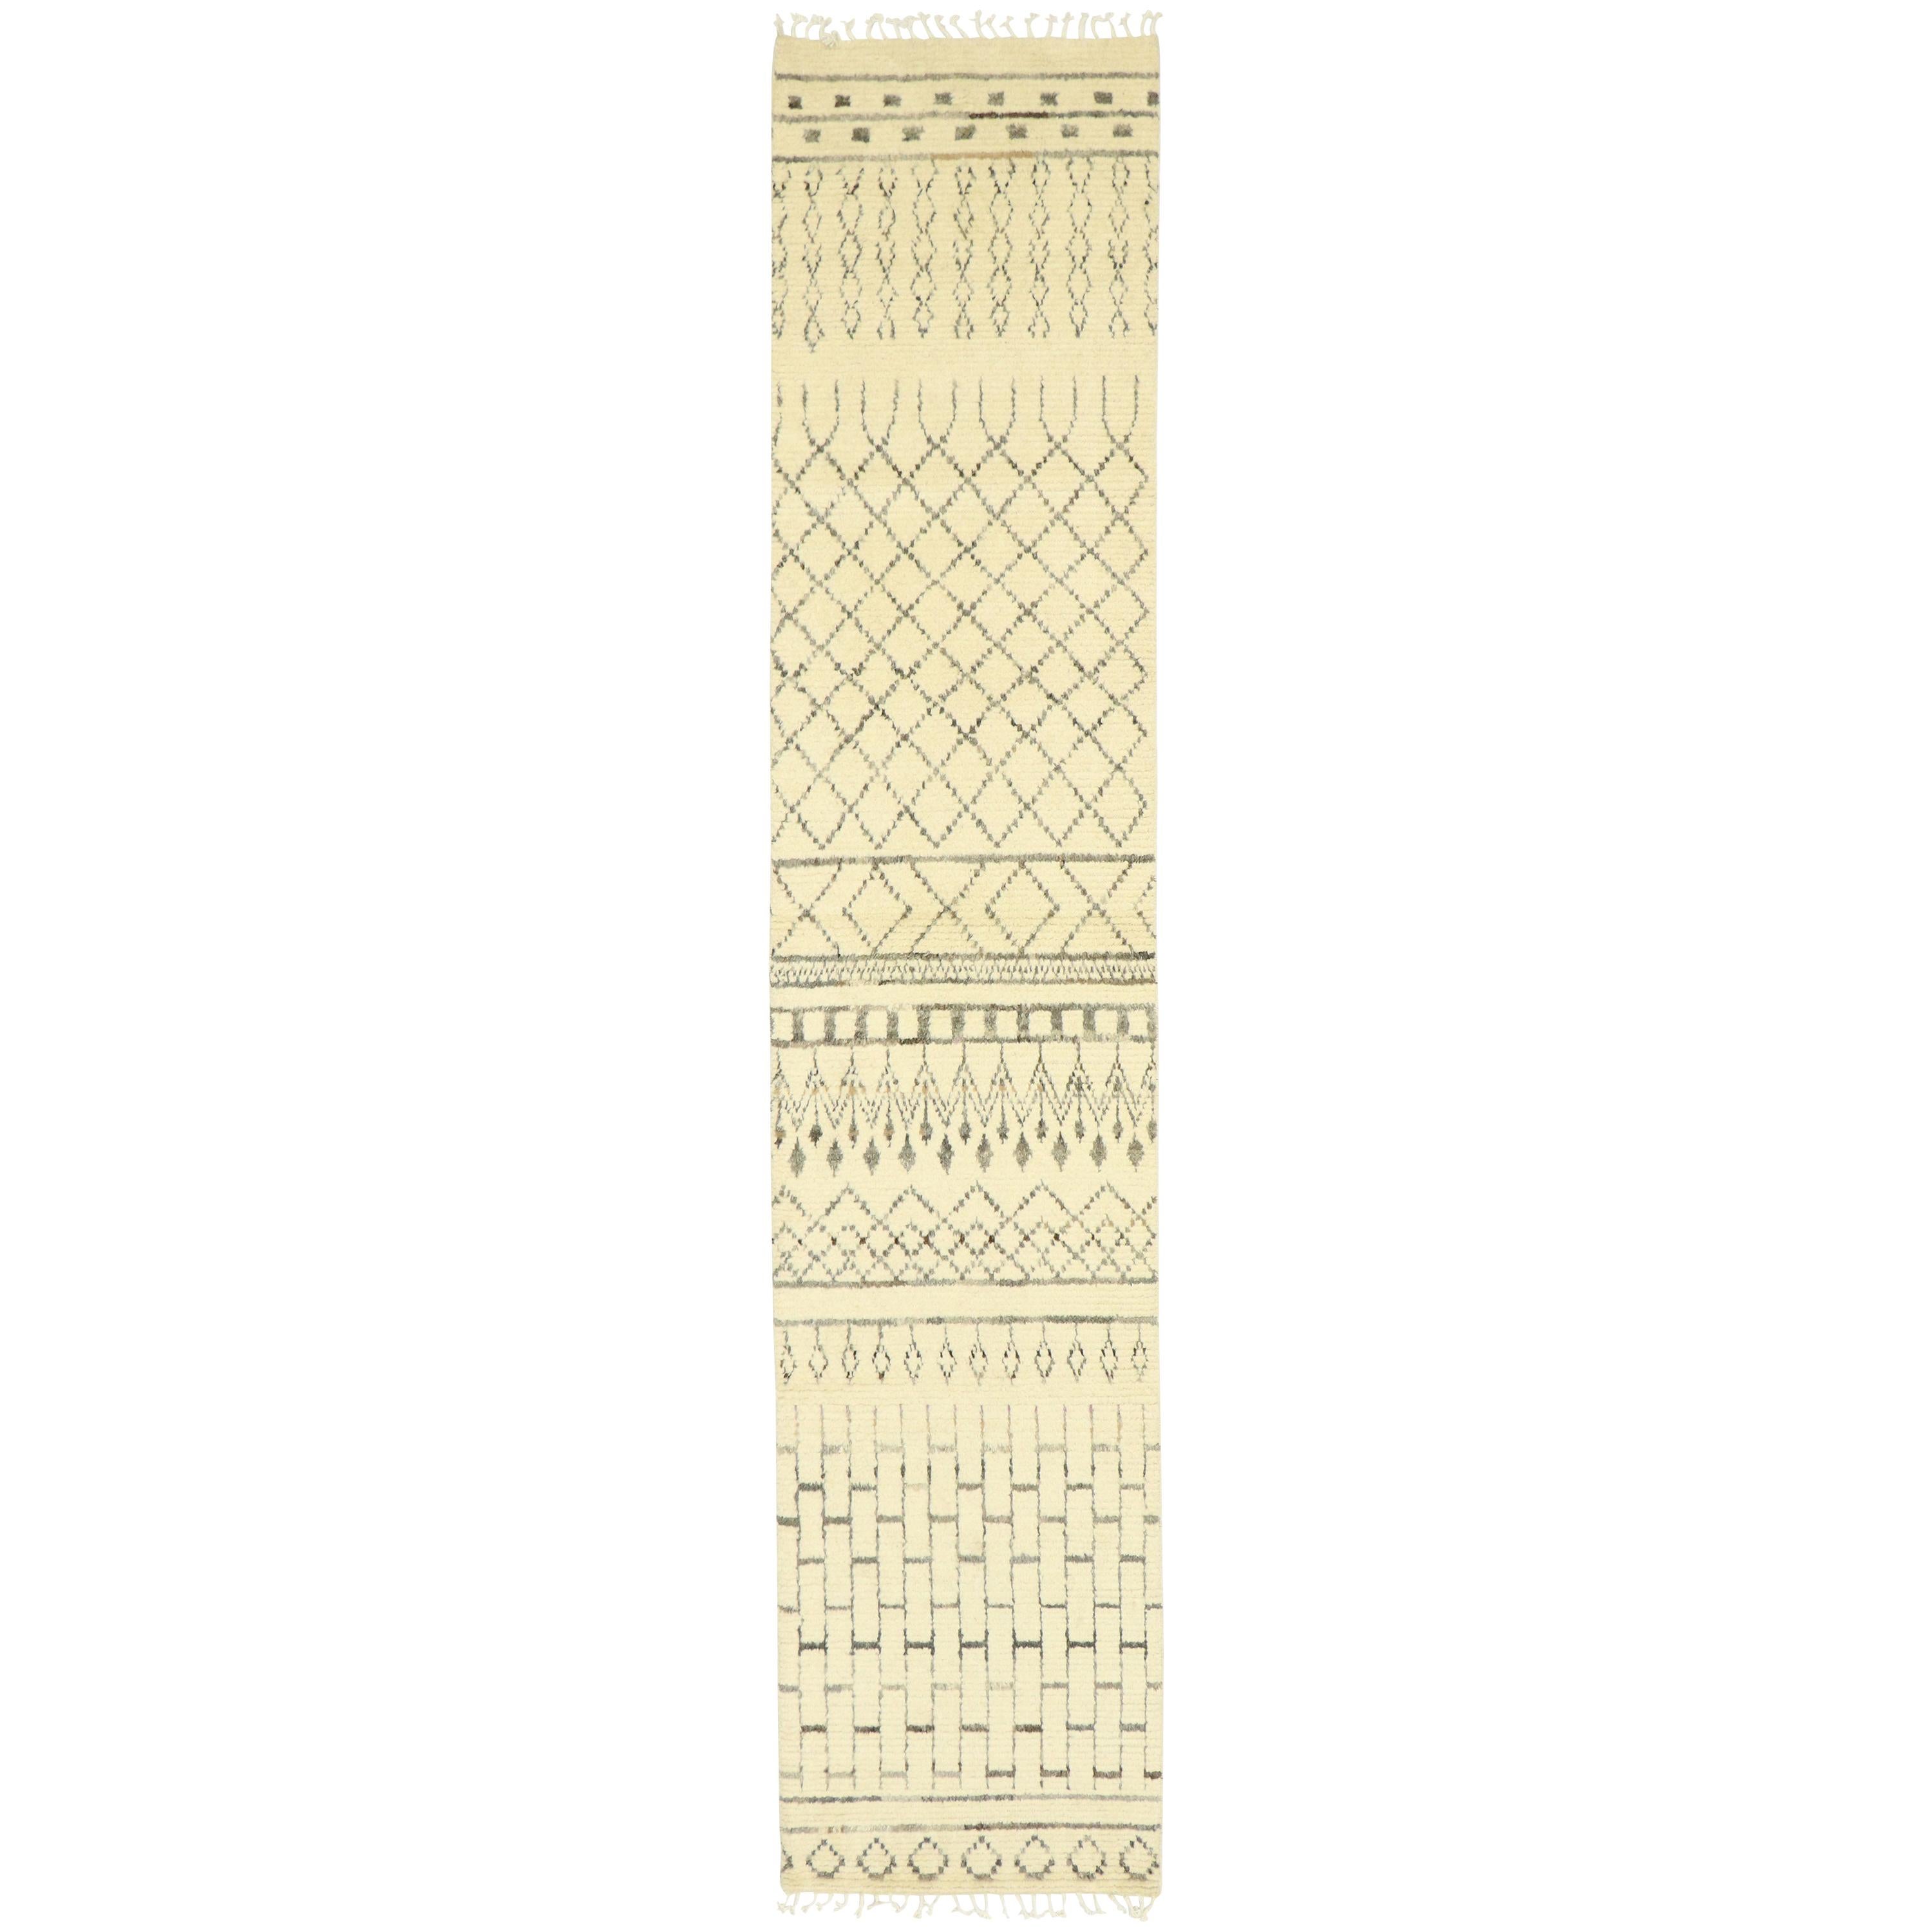 Organic Modern Moroccan Rug Runner, Brutalist Style Meets Cozy Nomad